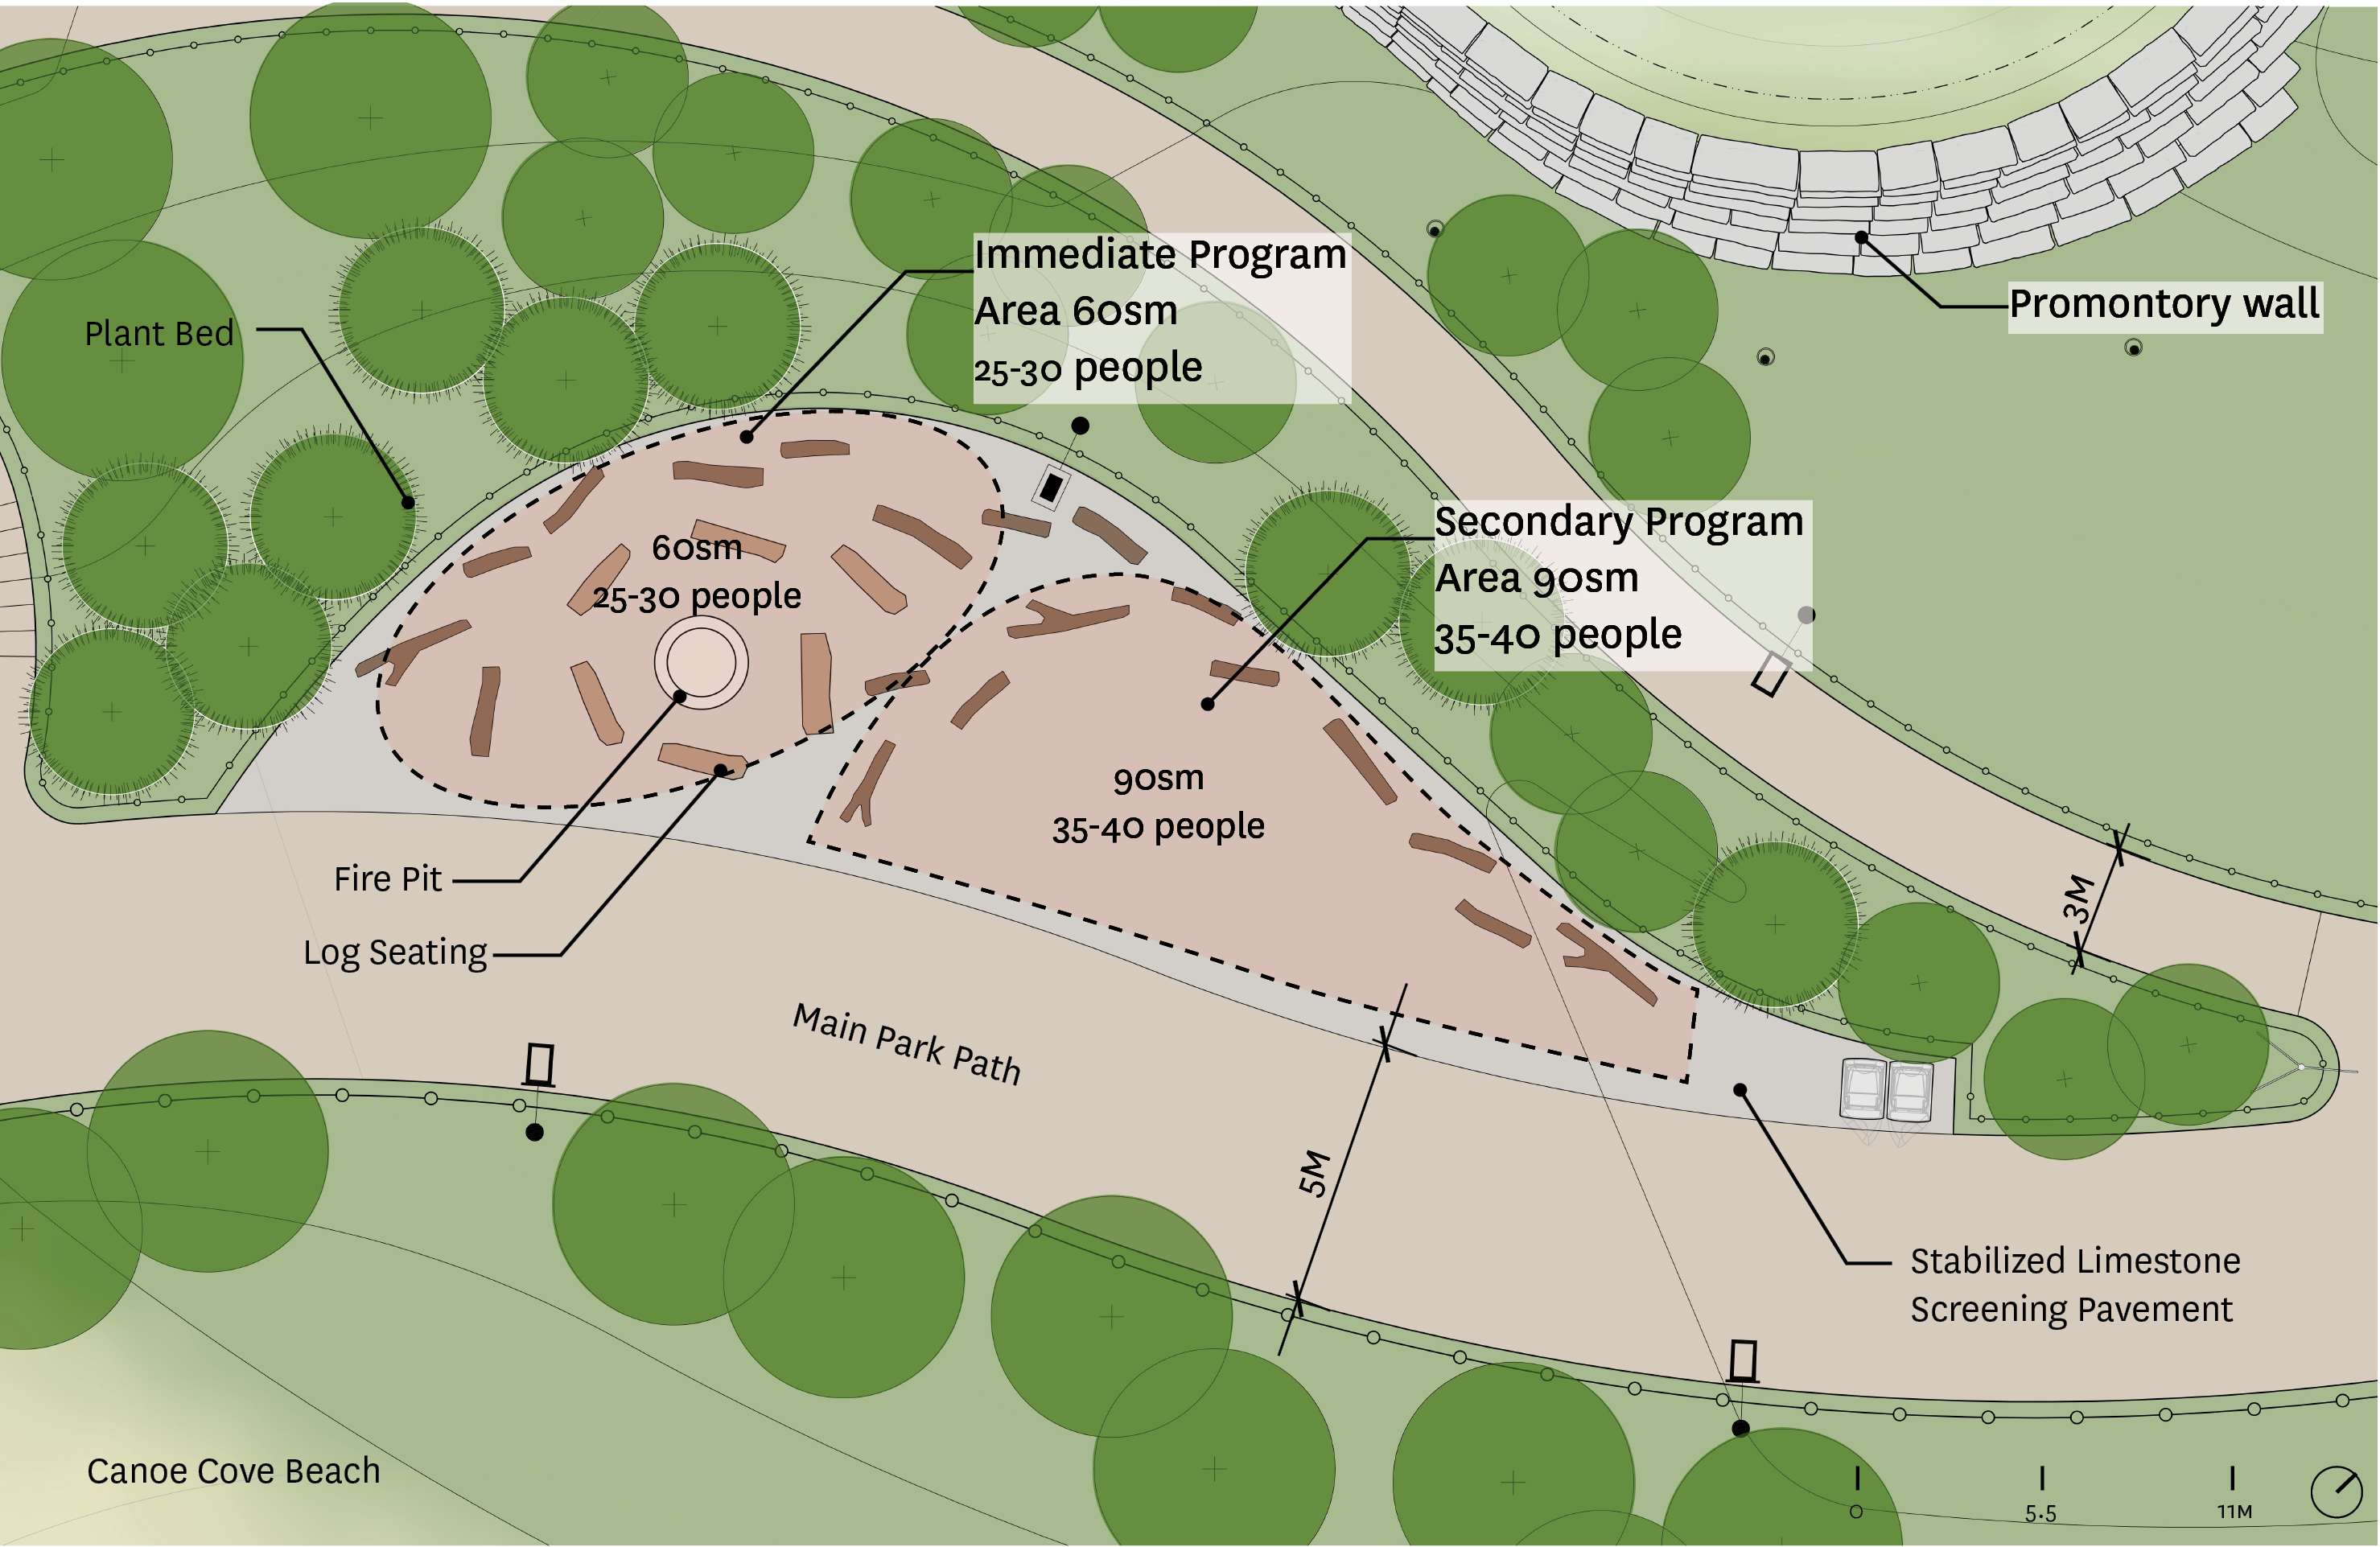 The proposed fire pit area and adjacent programming space